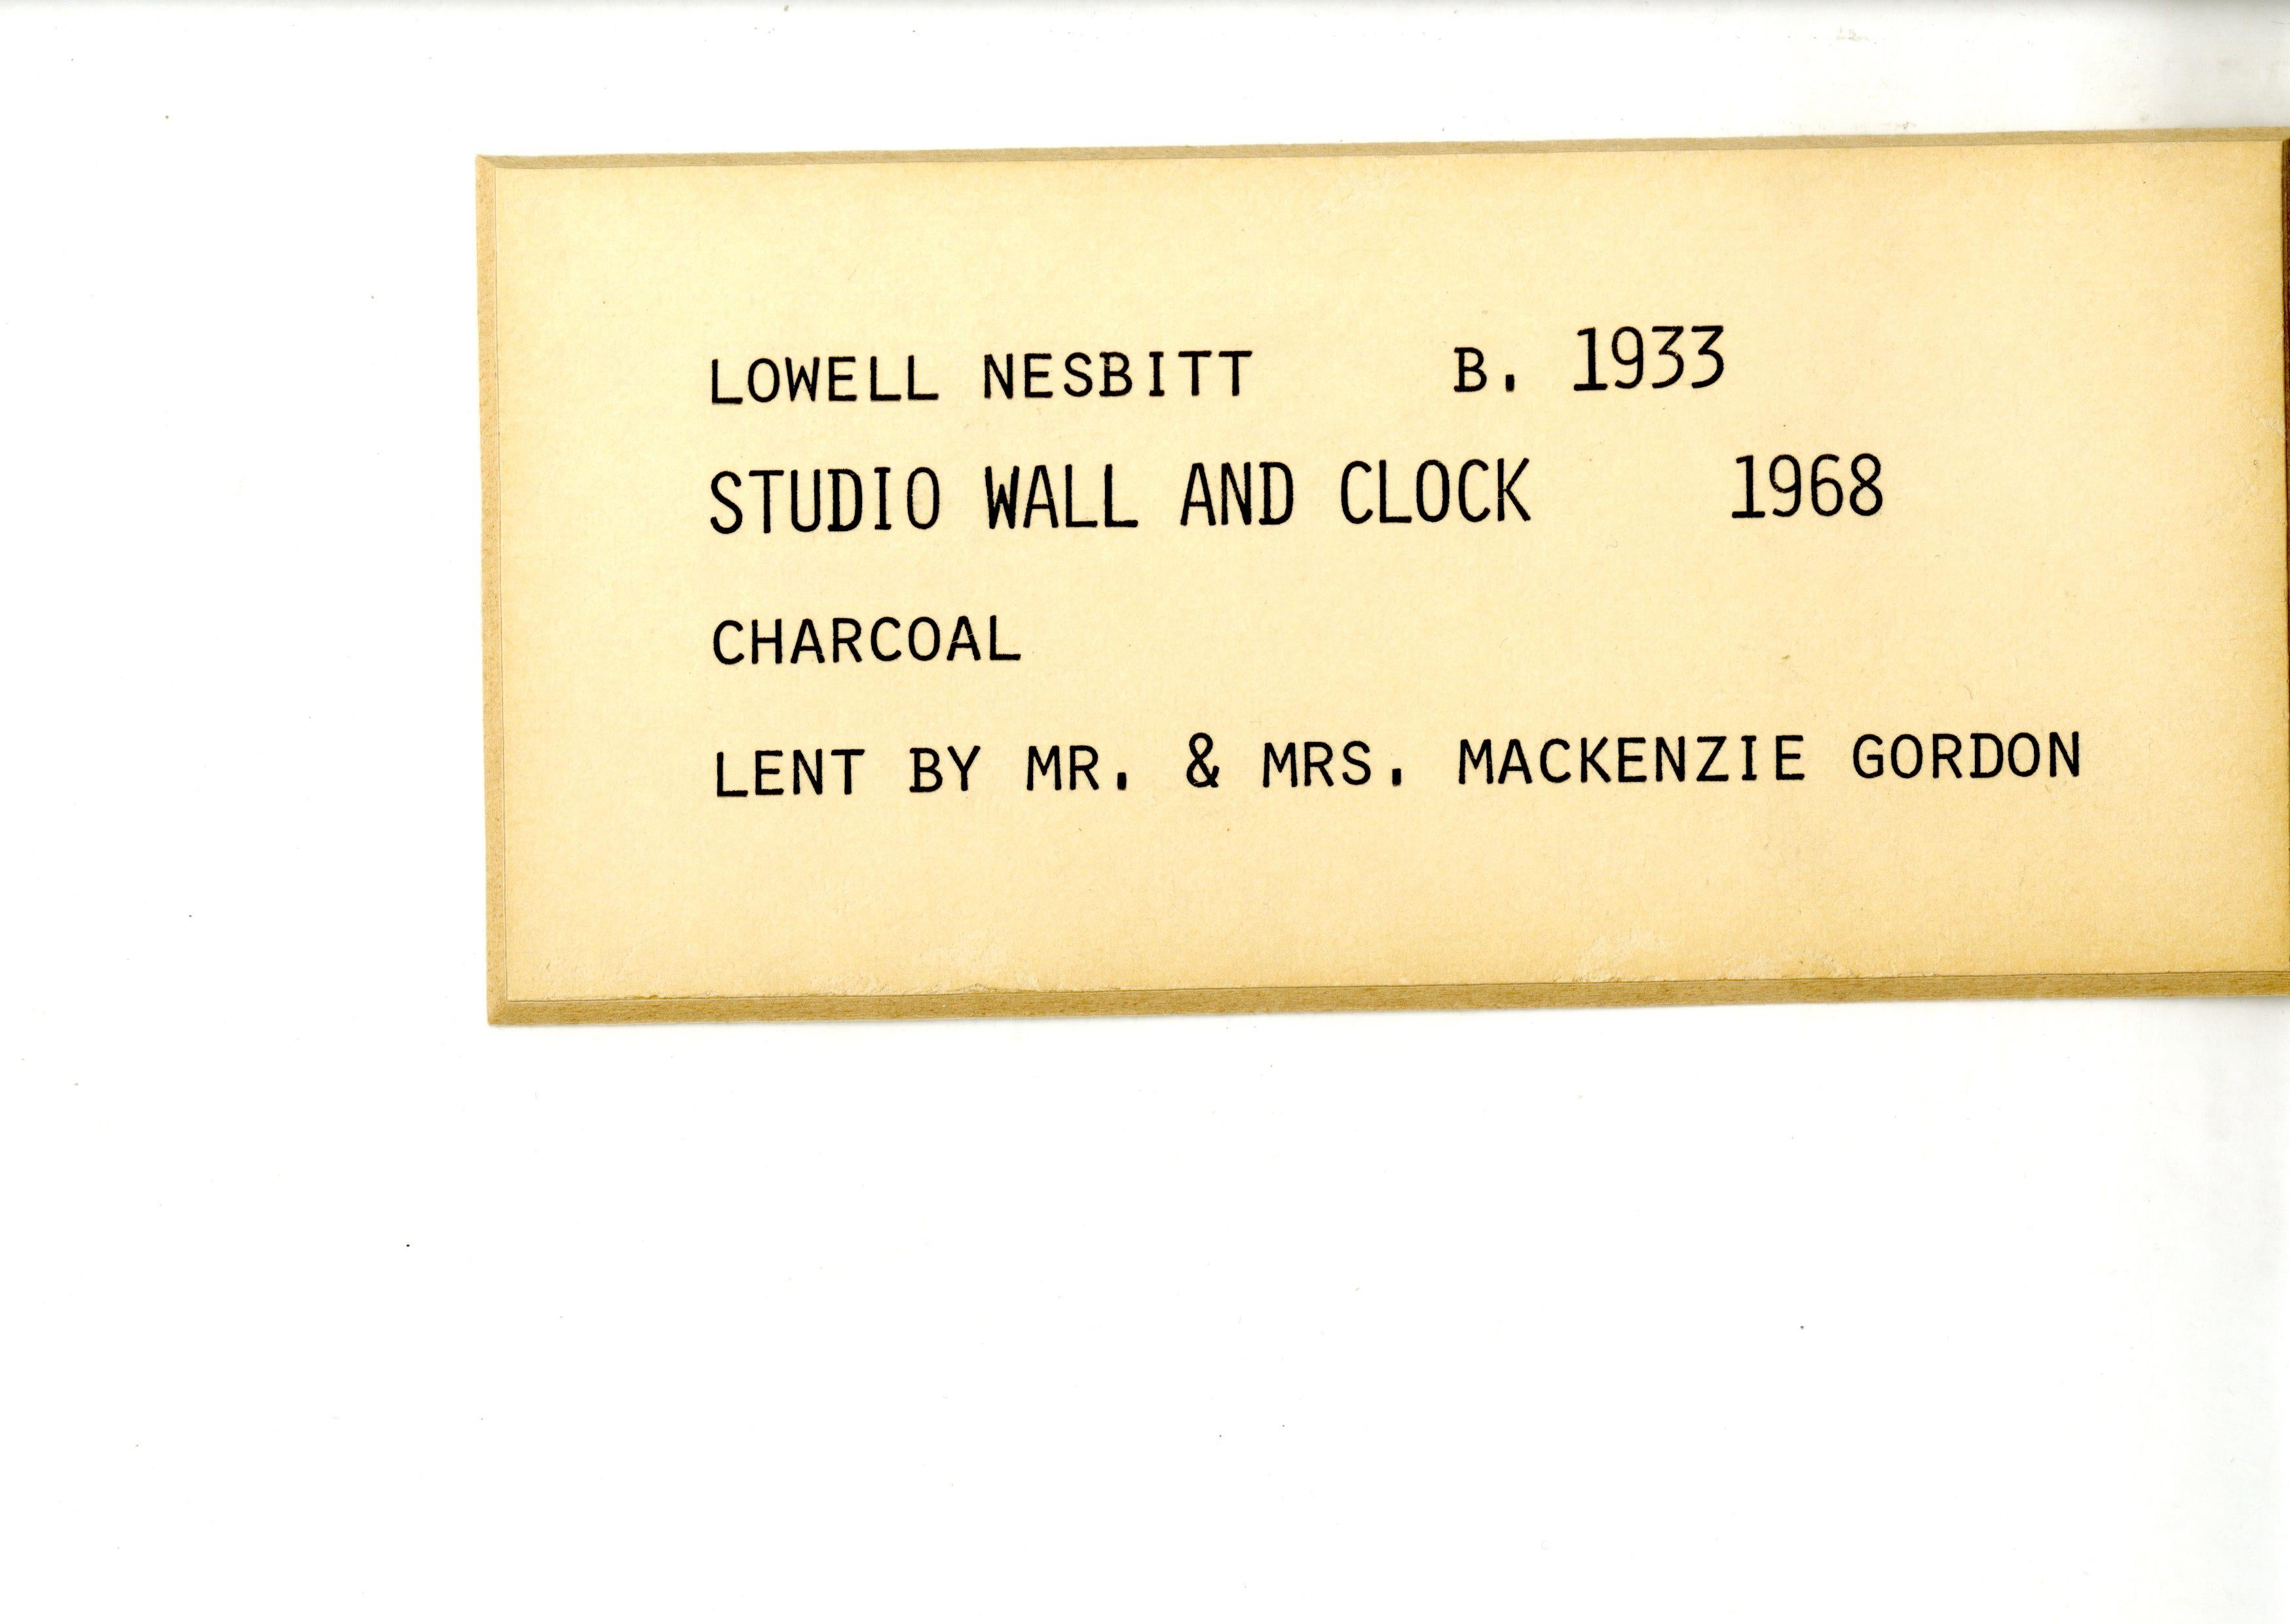 Studio Wall Clock (unique painting exhibited at the Corcoran Gallery w/labels) - Modern Art by Lowell Nesbitt